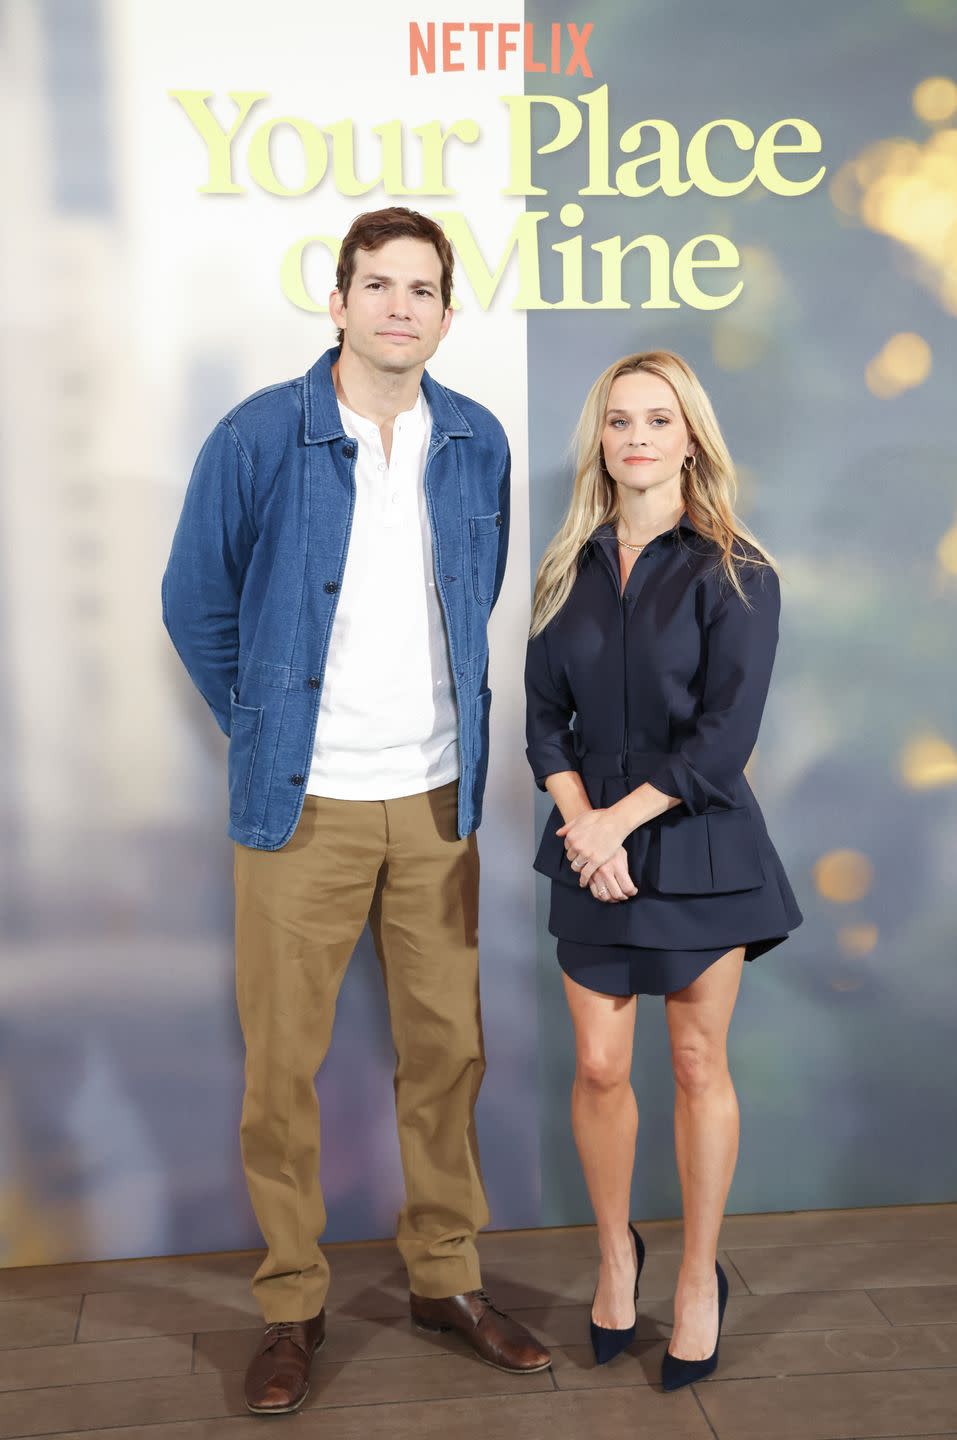 ashton kutcher and reese witherspoon at the photocall for netflix's 